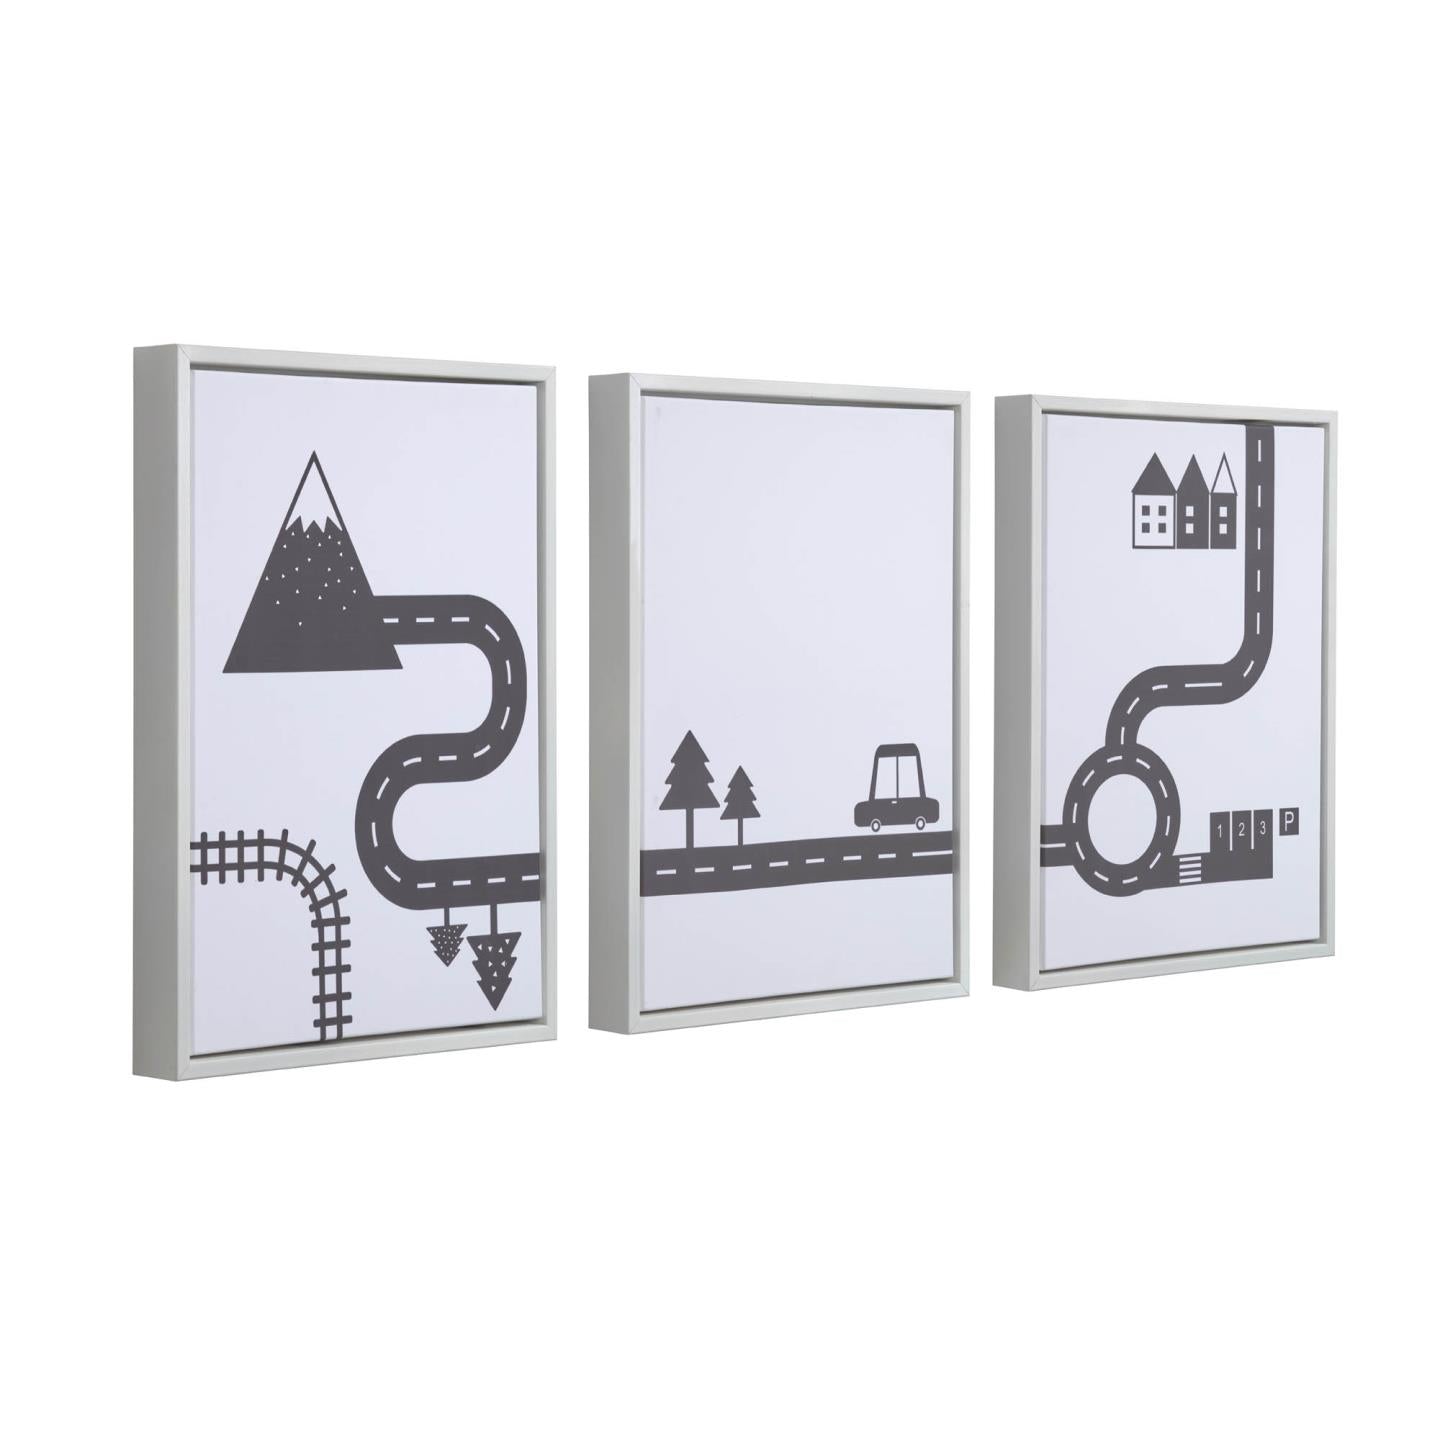 Set of 3 Nisi black cars pictures in white wood frame